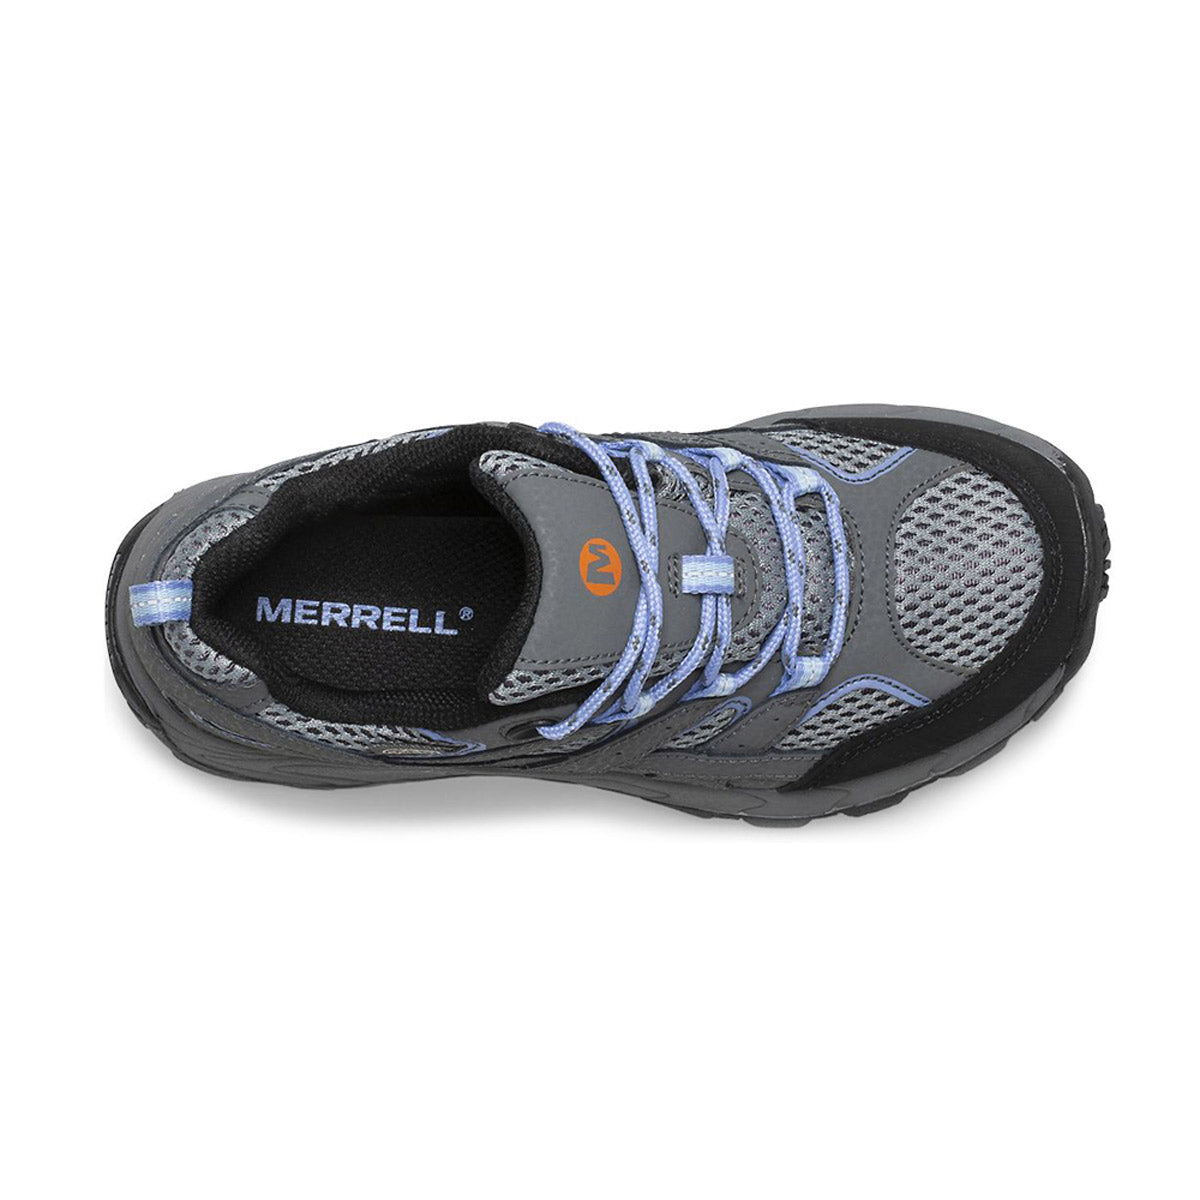 Top view of a Merrell Moab 2 Low Lace Waterproof Grey/Periwinkle - Kids hiking shoe with blue and grey accents, featuring M-Select™ GRIP outsoles.